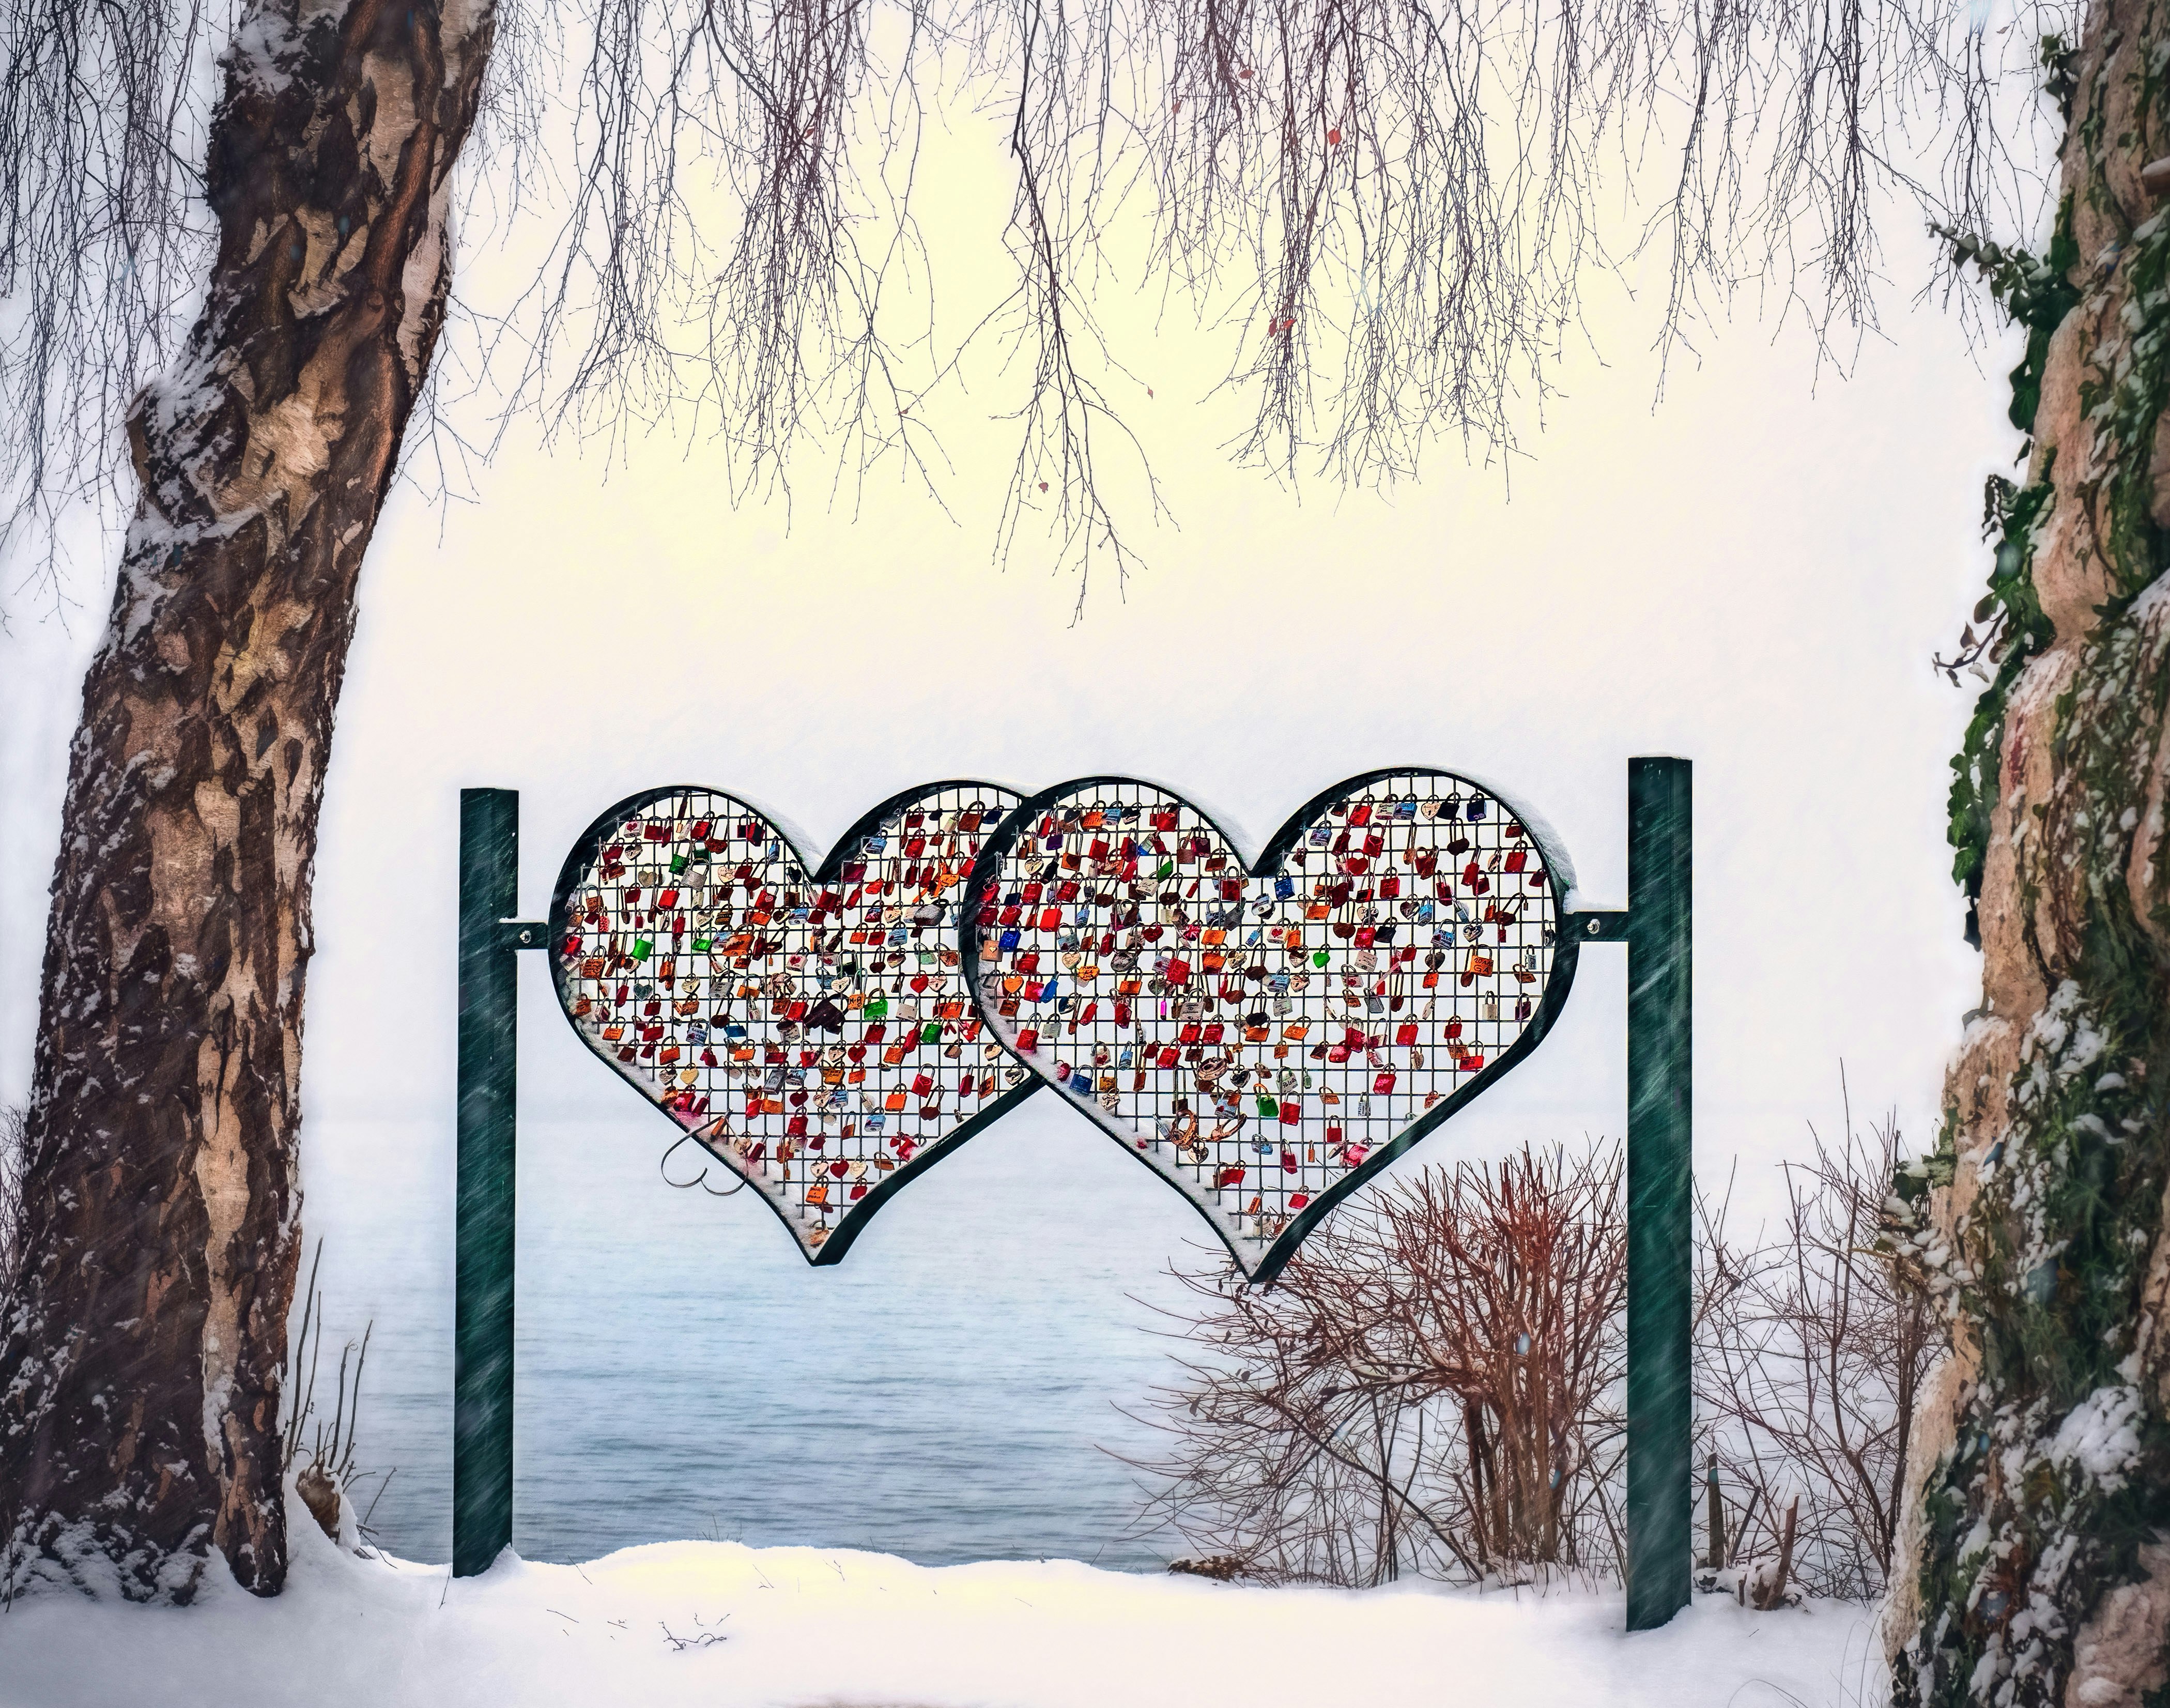 Two colorful heart shapes hanging from poles in front of the water.